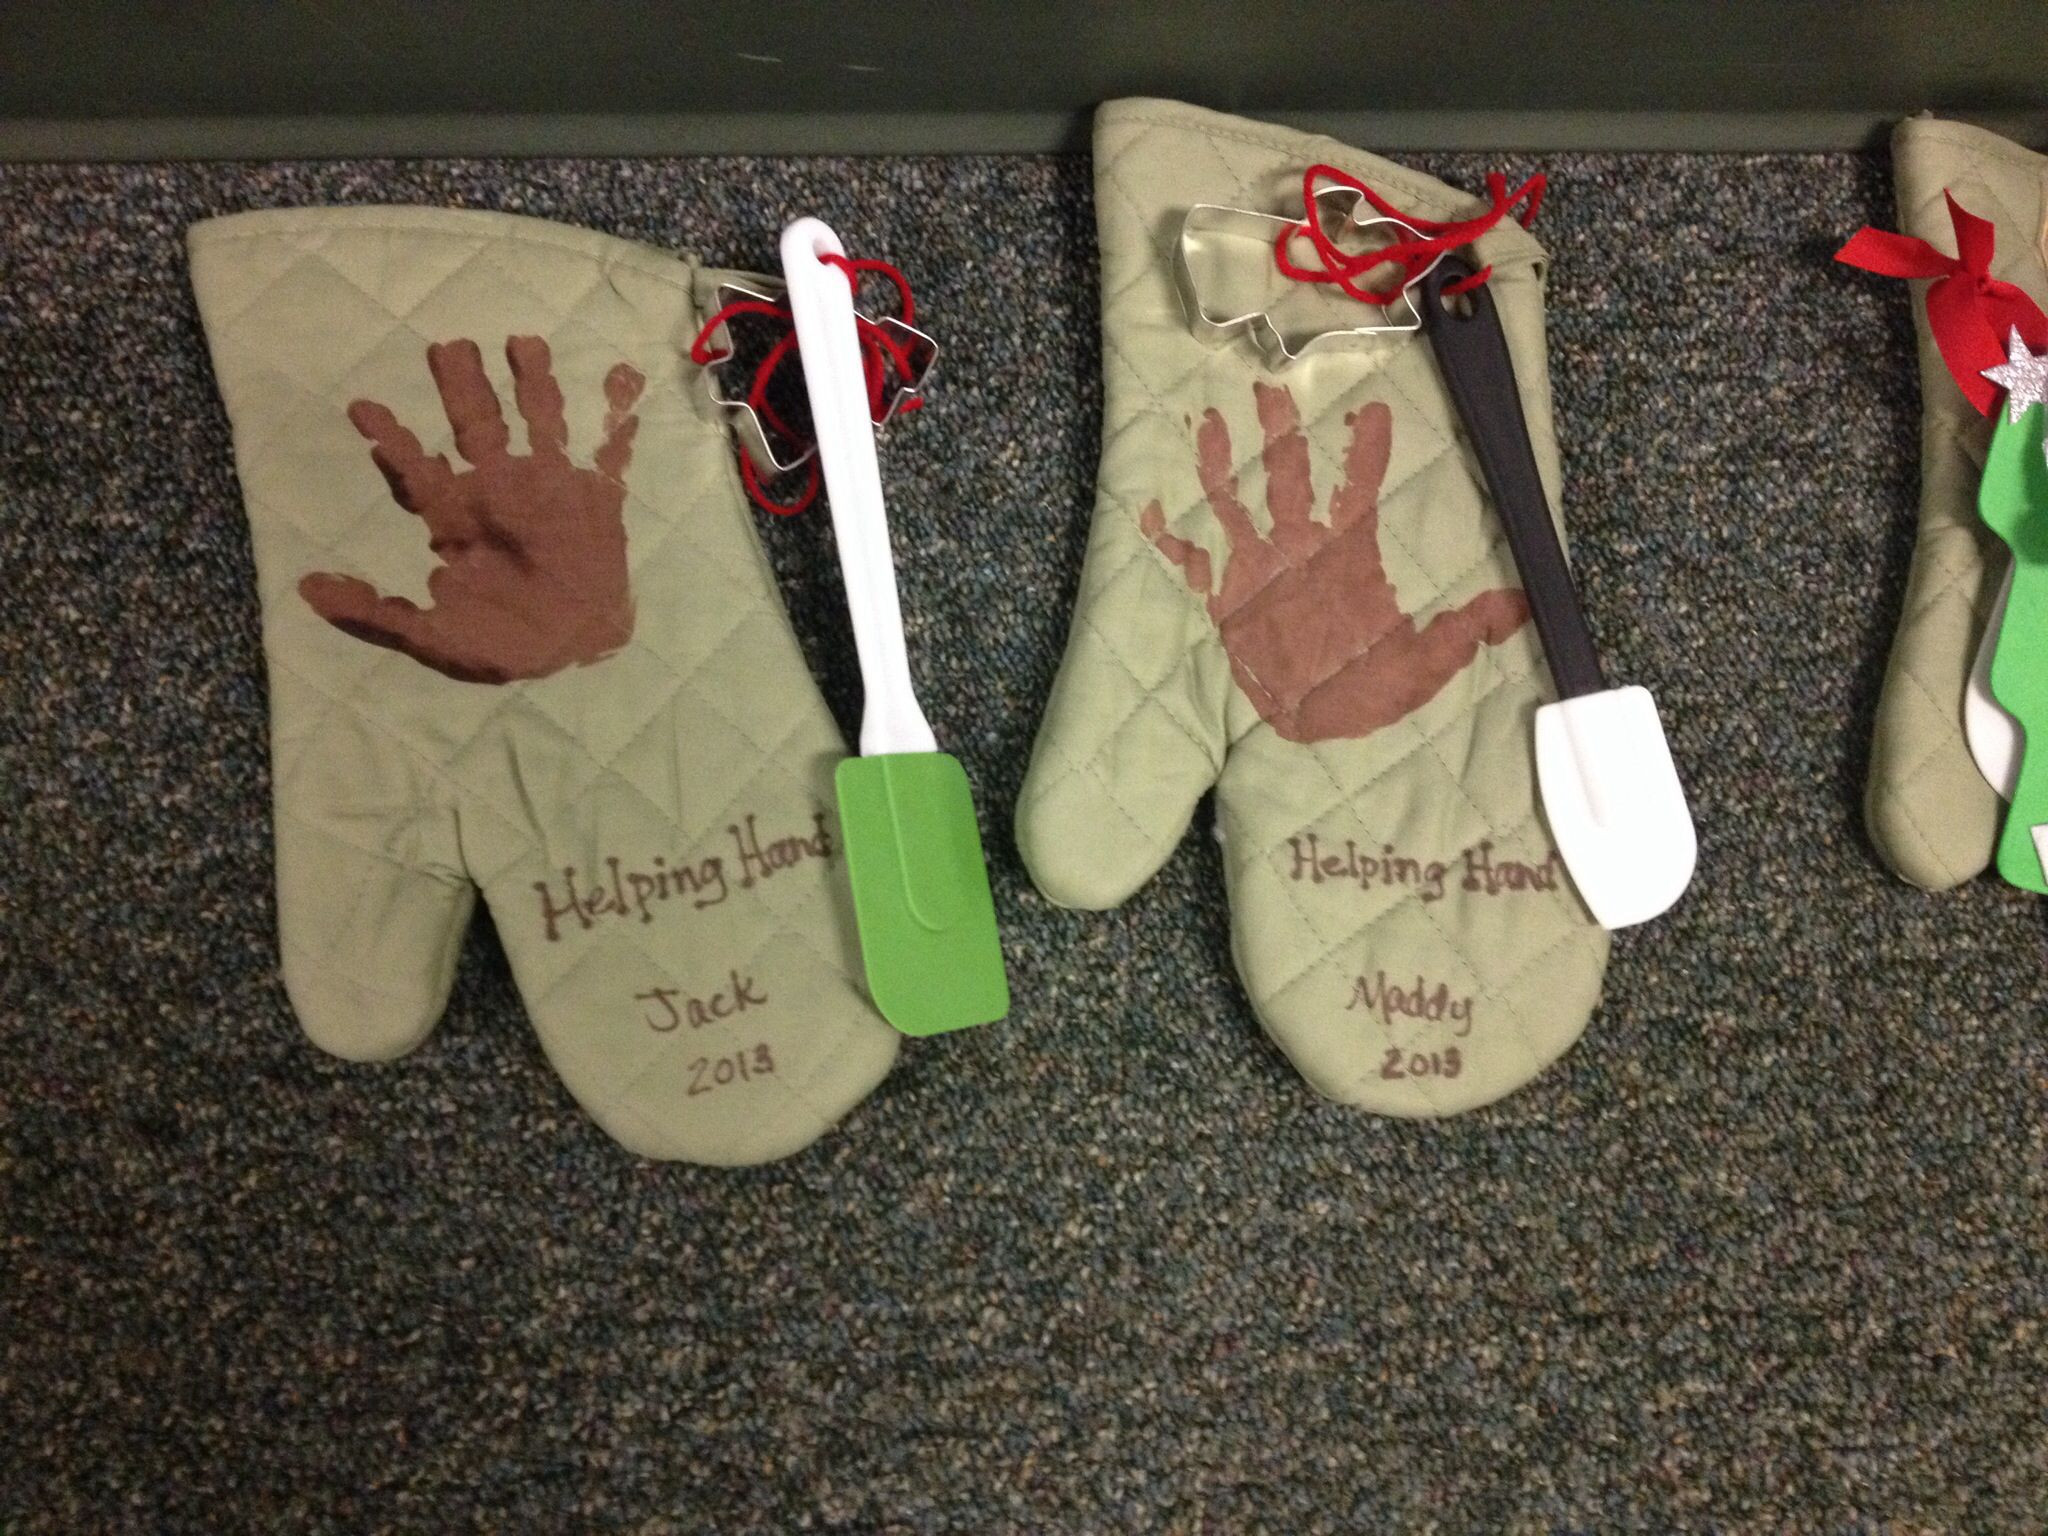 Gift Ideas For Daycare Kids
 Helping Hand oven mitts as Christmas ts for parents